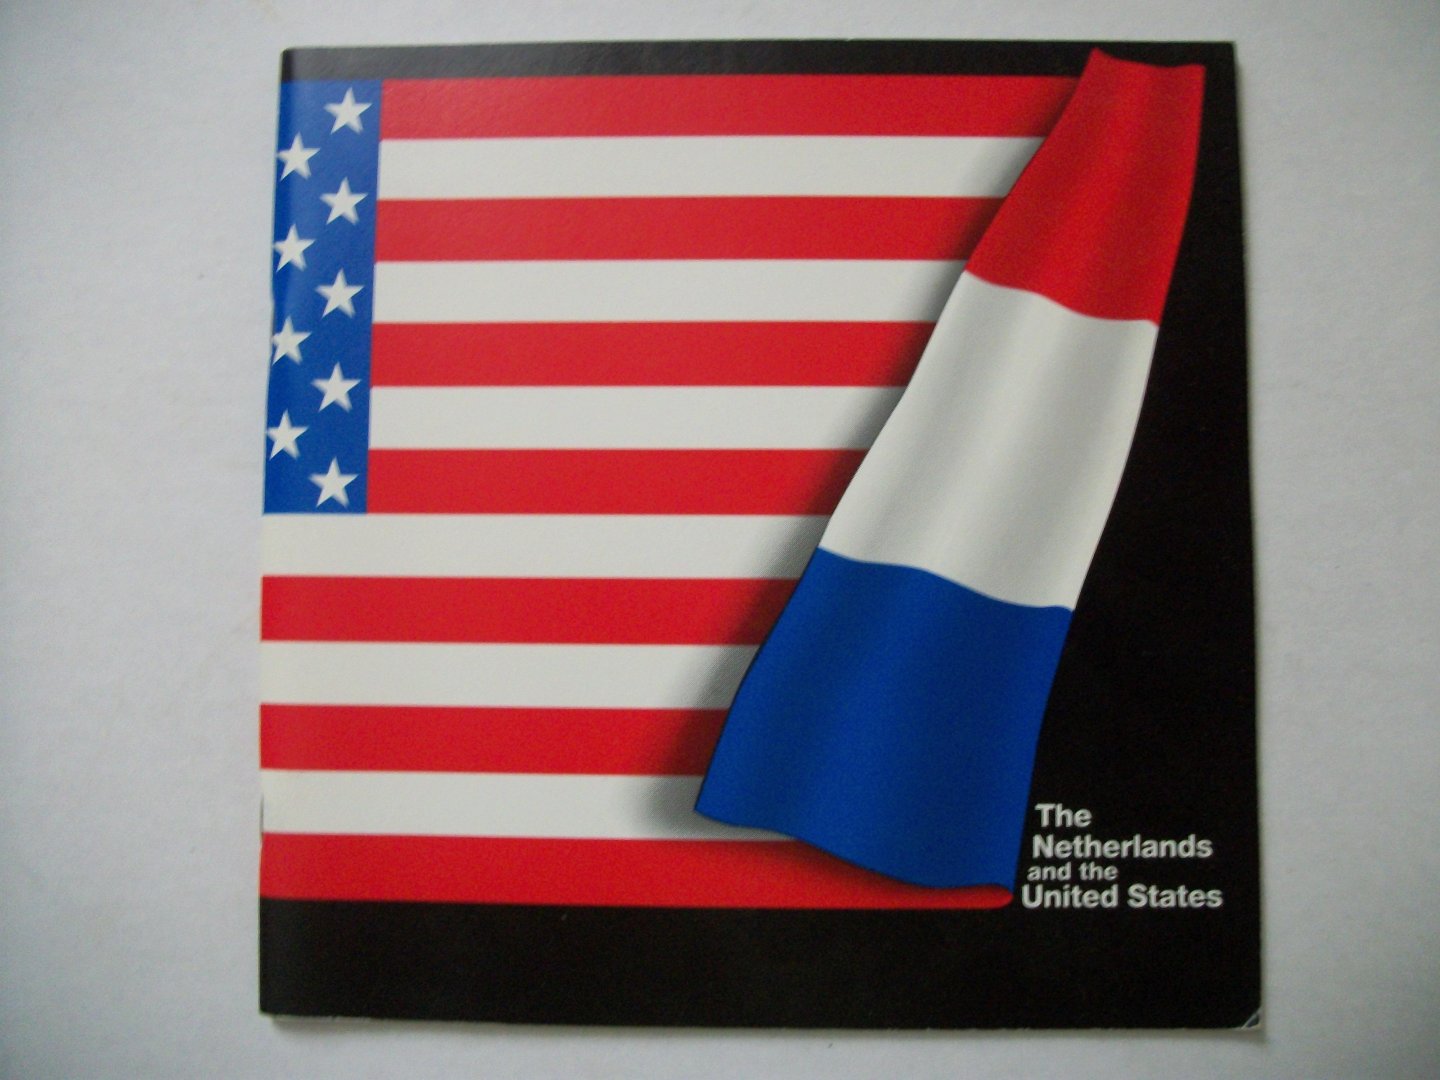 Koning, Hans - The Netherlands and the United States